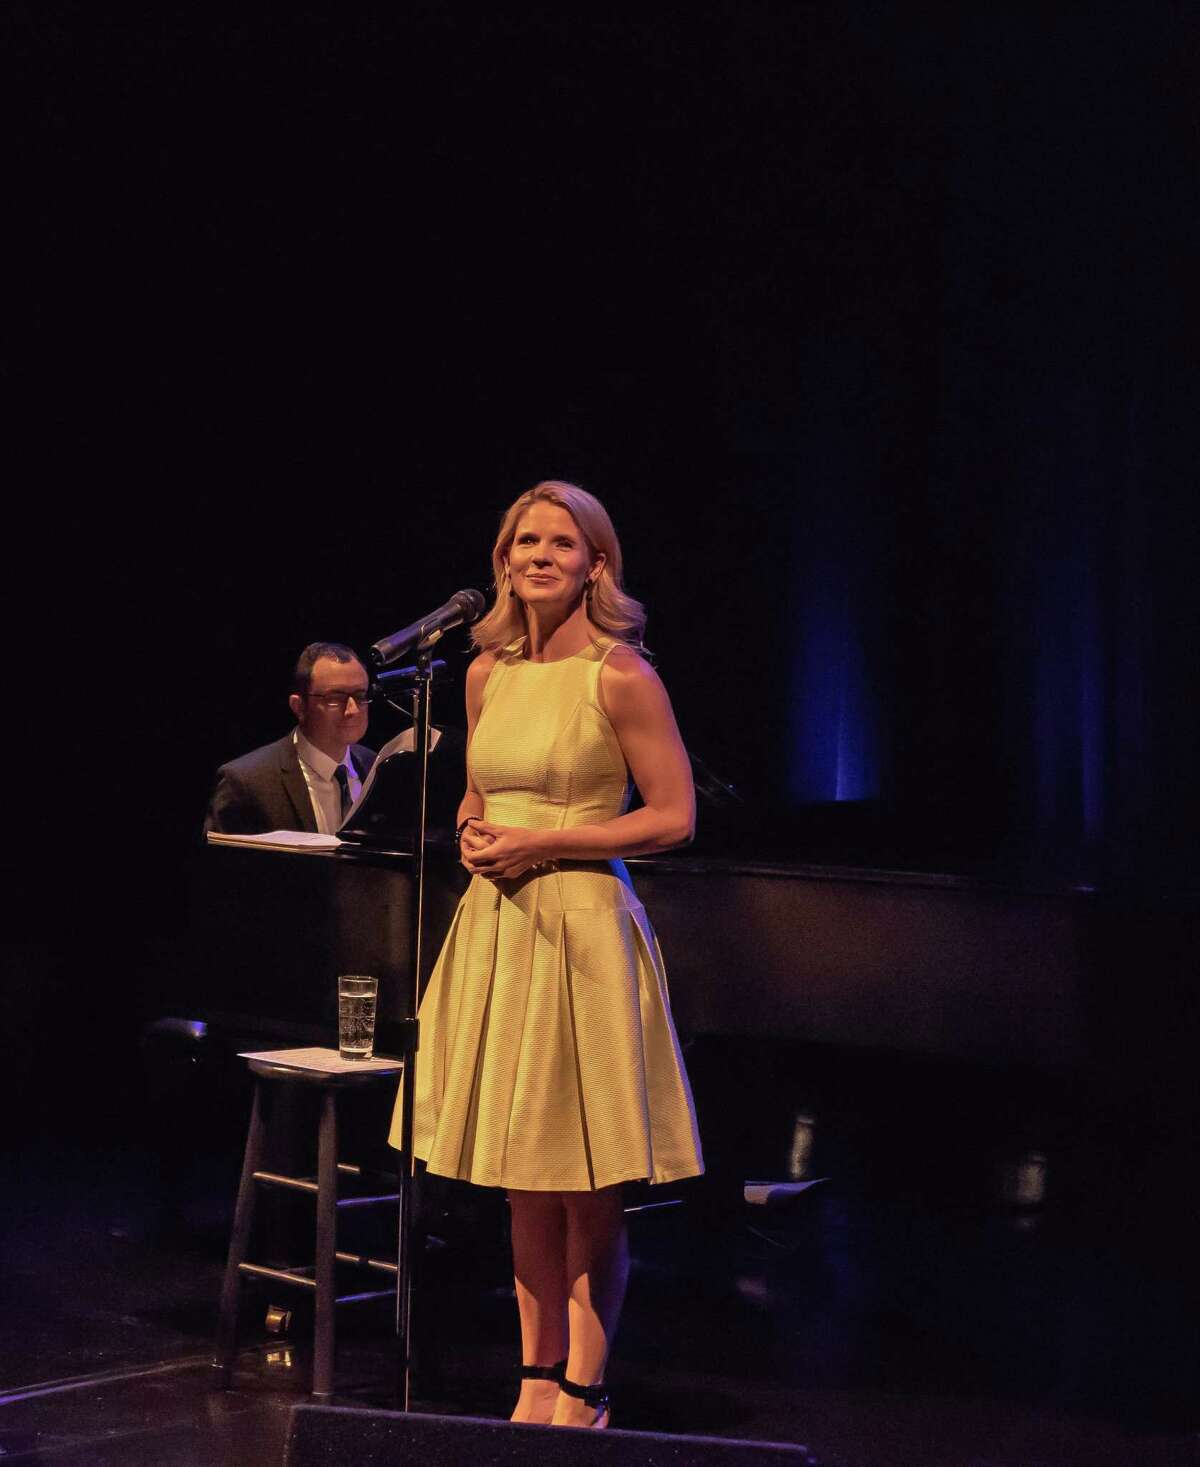 Broadway star Kelli O’Hara, of Westport, will be among the entertainers in “Staged at Home,” a virtual benefit concert for Long Wharf Theatre in New Haven, June 8. She’s seen onstage here as Long Wharf Theatre’s 2016 gala performer.